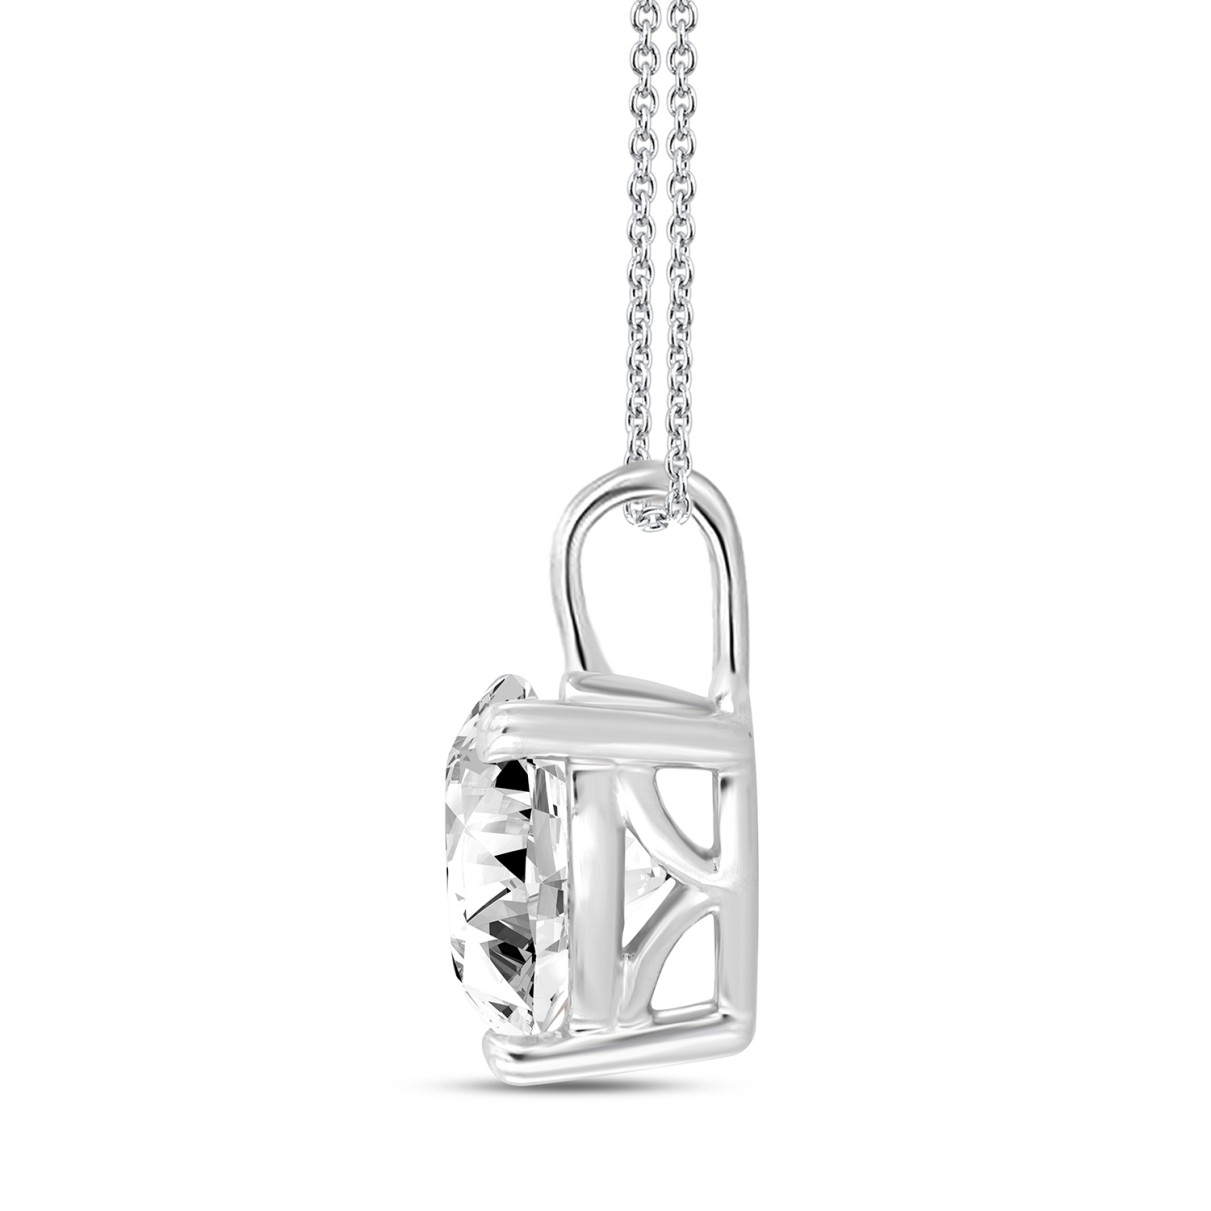 LADIES SOLITAIRE PENDANT WITH CHAIN 1 1/2CT HEART DIAMOND 14K WHITE GOLD